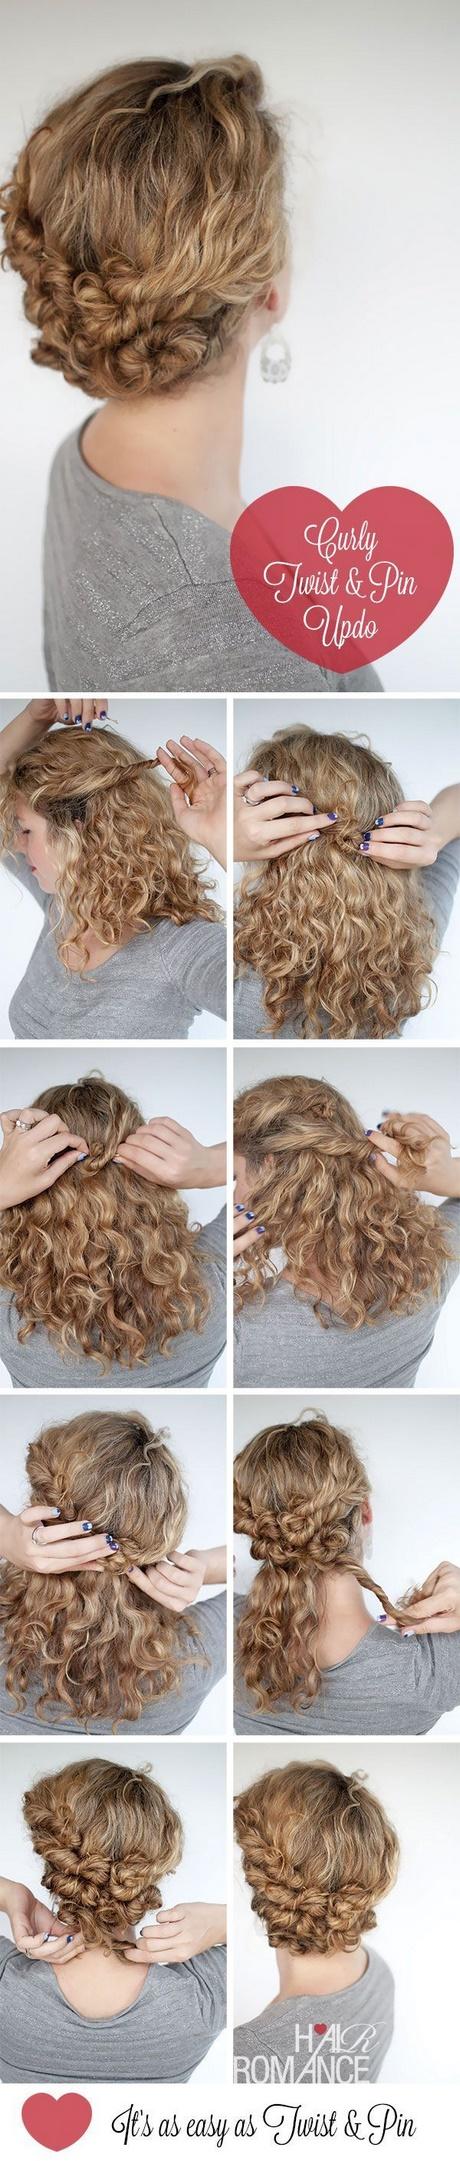 Easy updos for thick curly hair easy-updos-for-thick-curly-hair-00_10